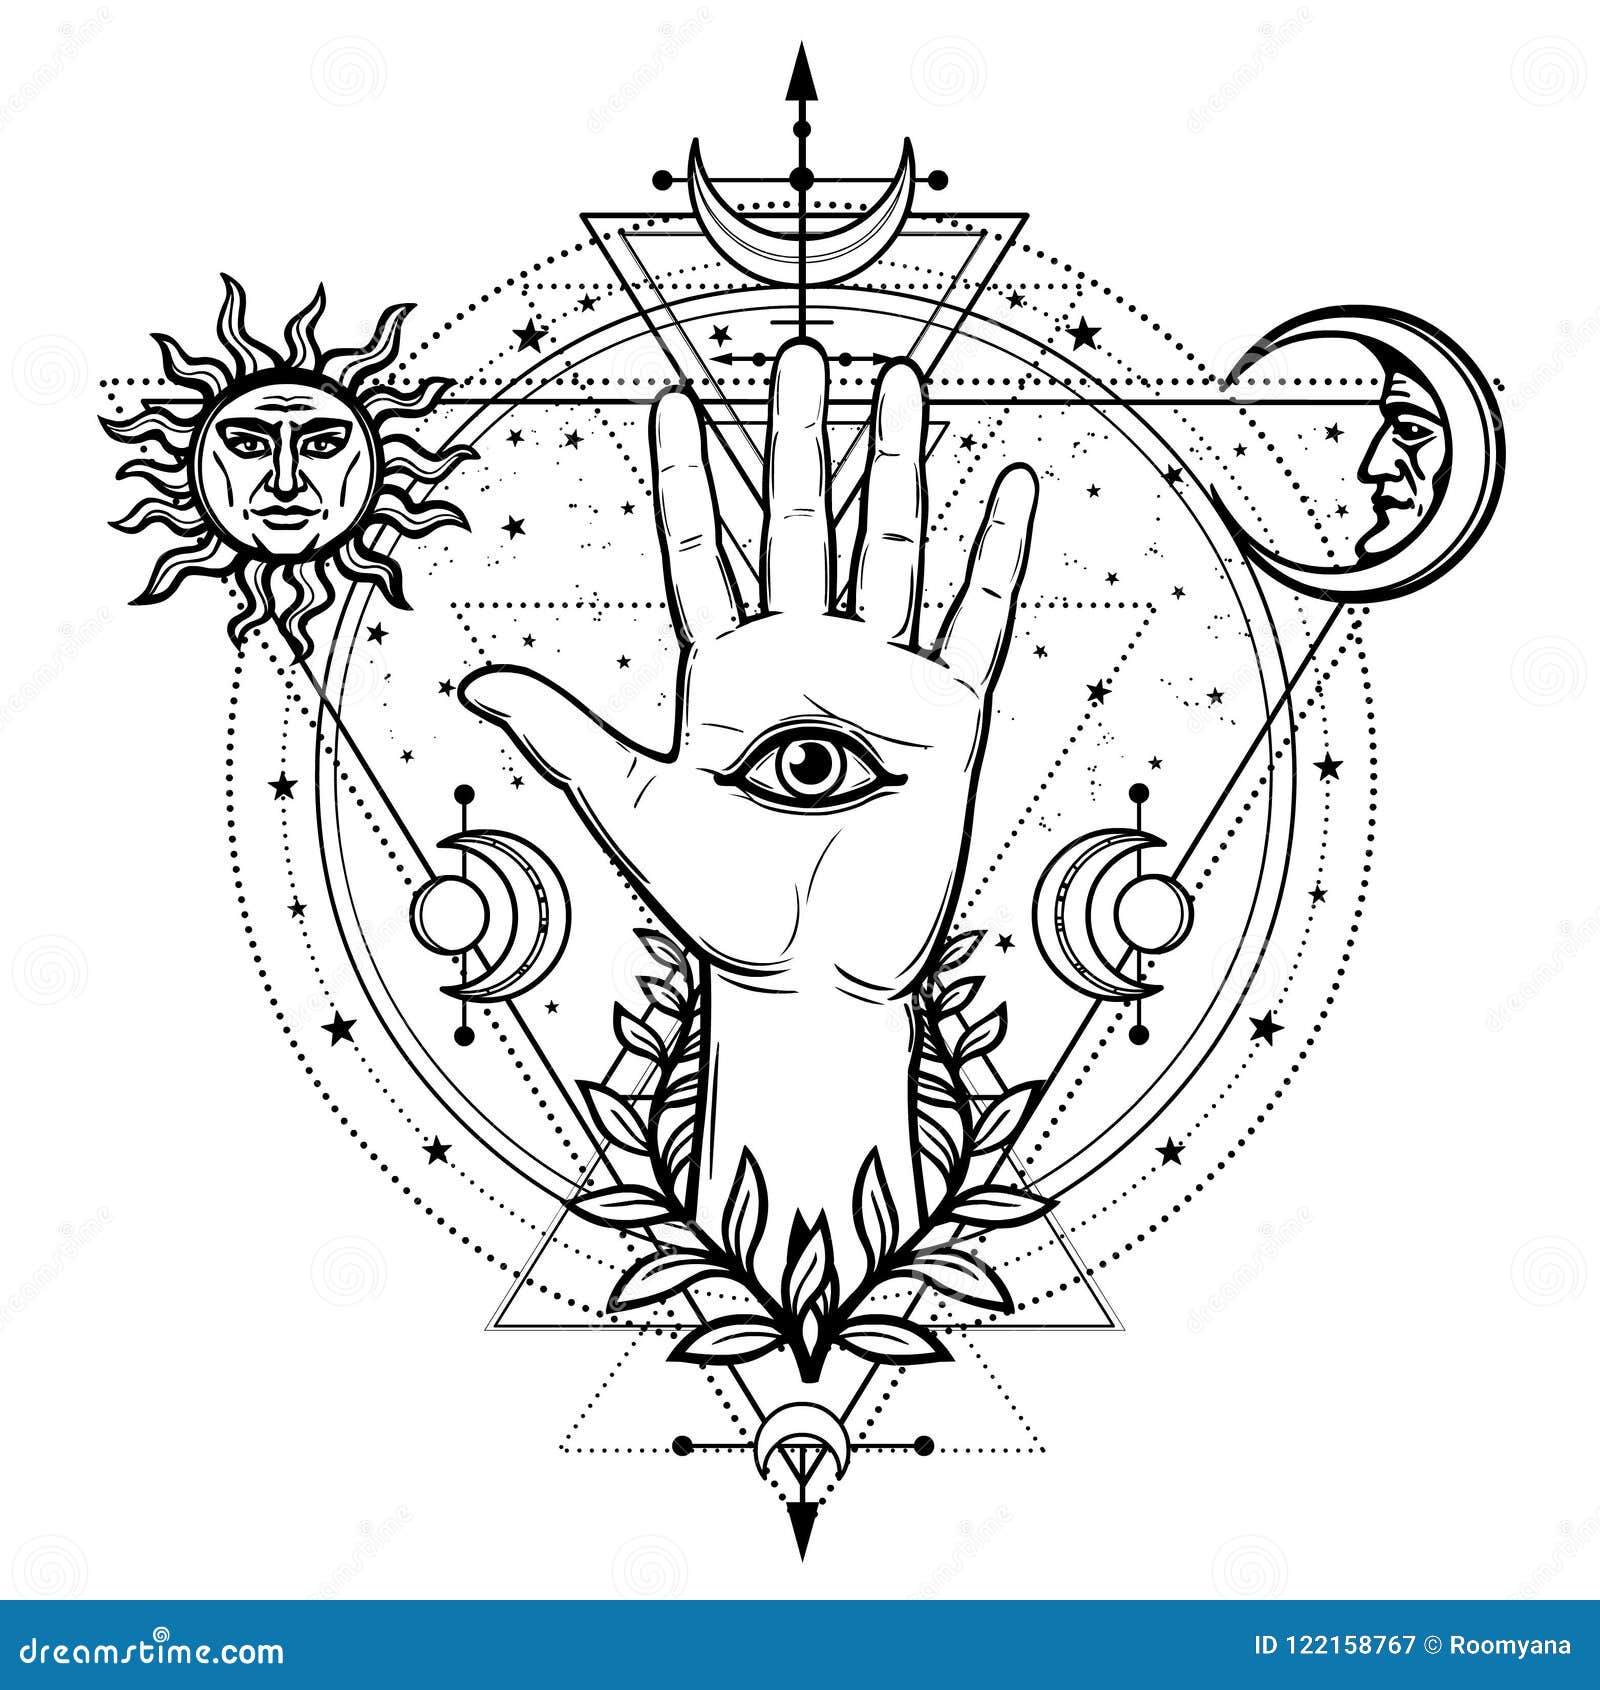 mystical drawing: divine hand, all-seeing eye, circle of a phase of the moon.